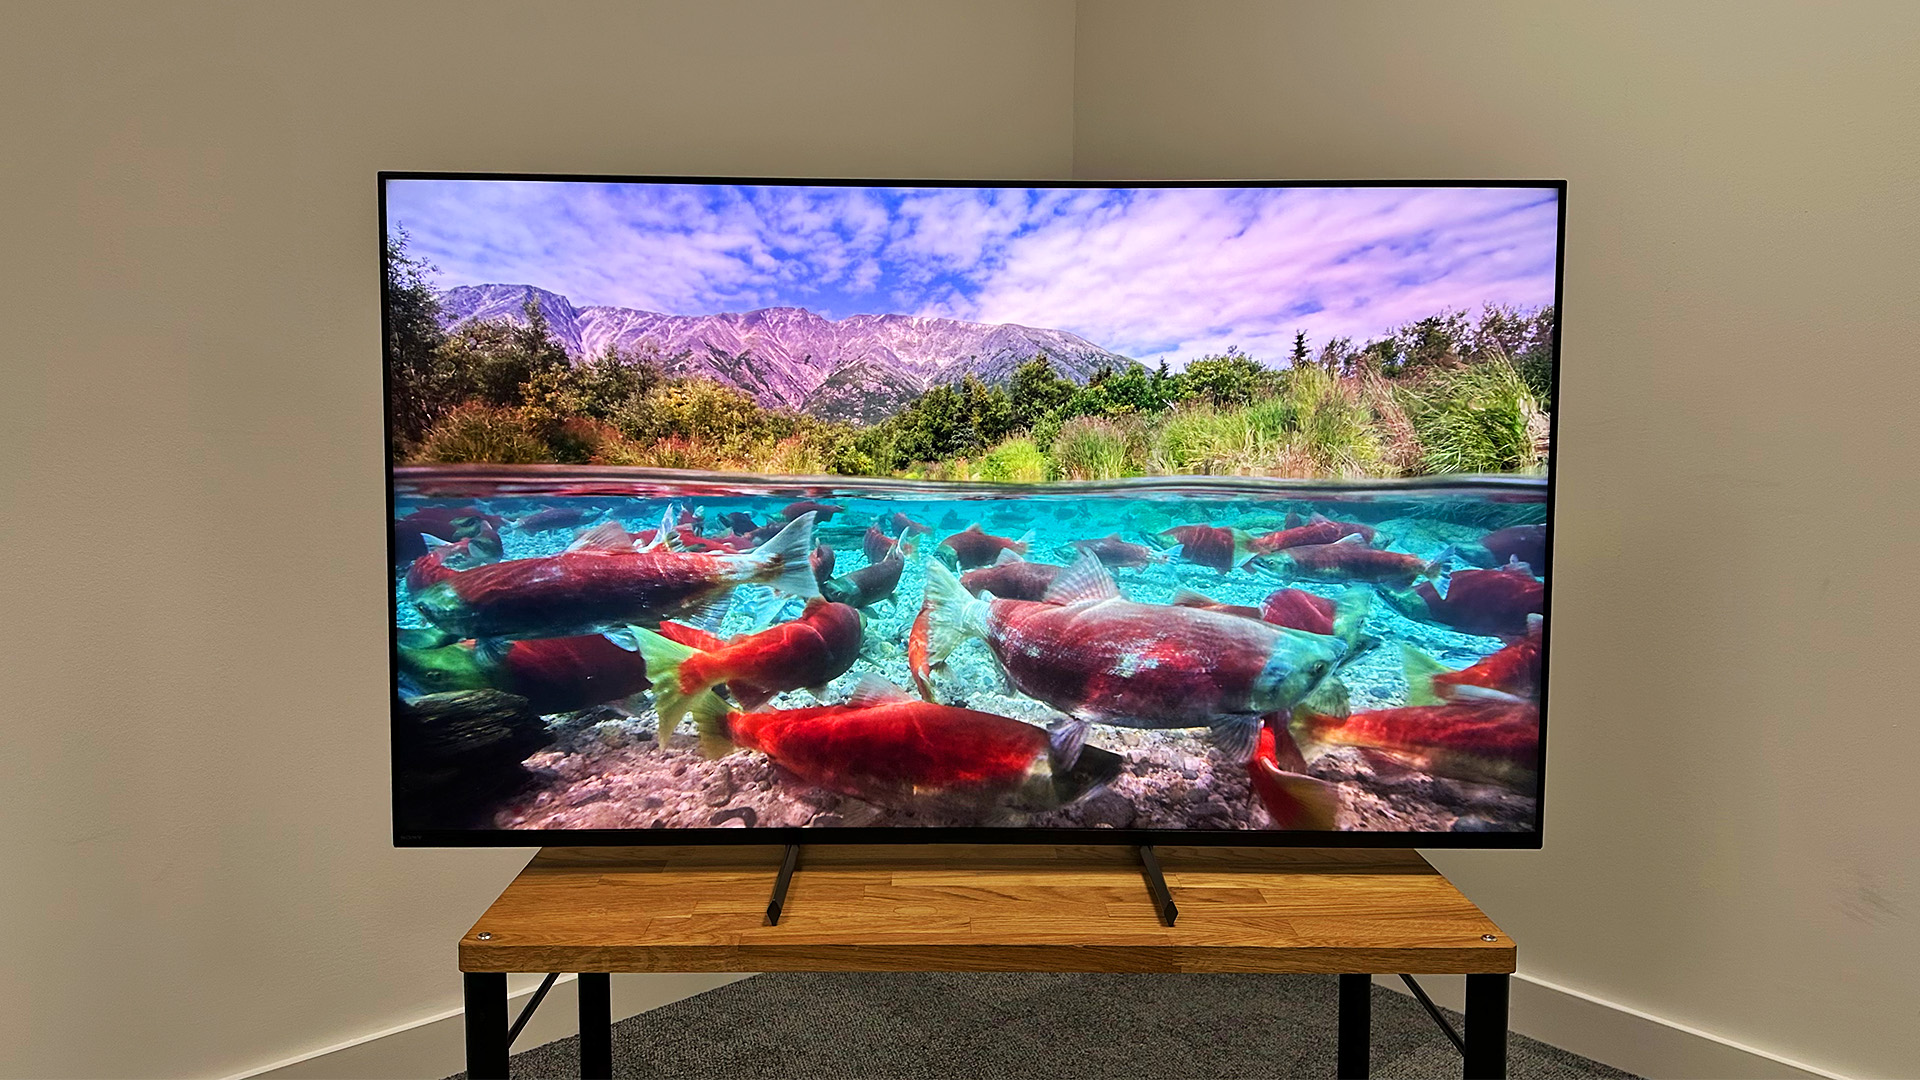 Sony X90L TV review: unassuming LCD TV could be a sleeper hit | What Hi-Fi?